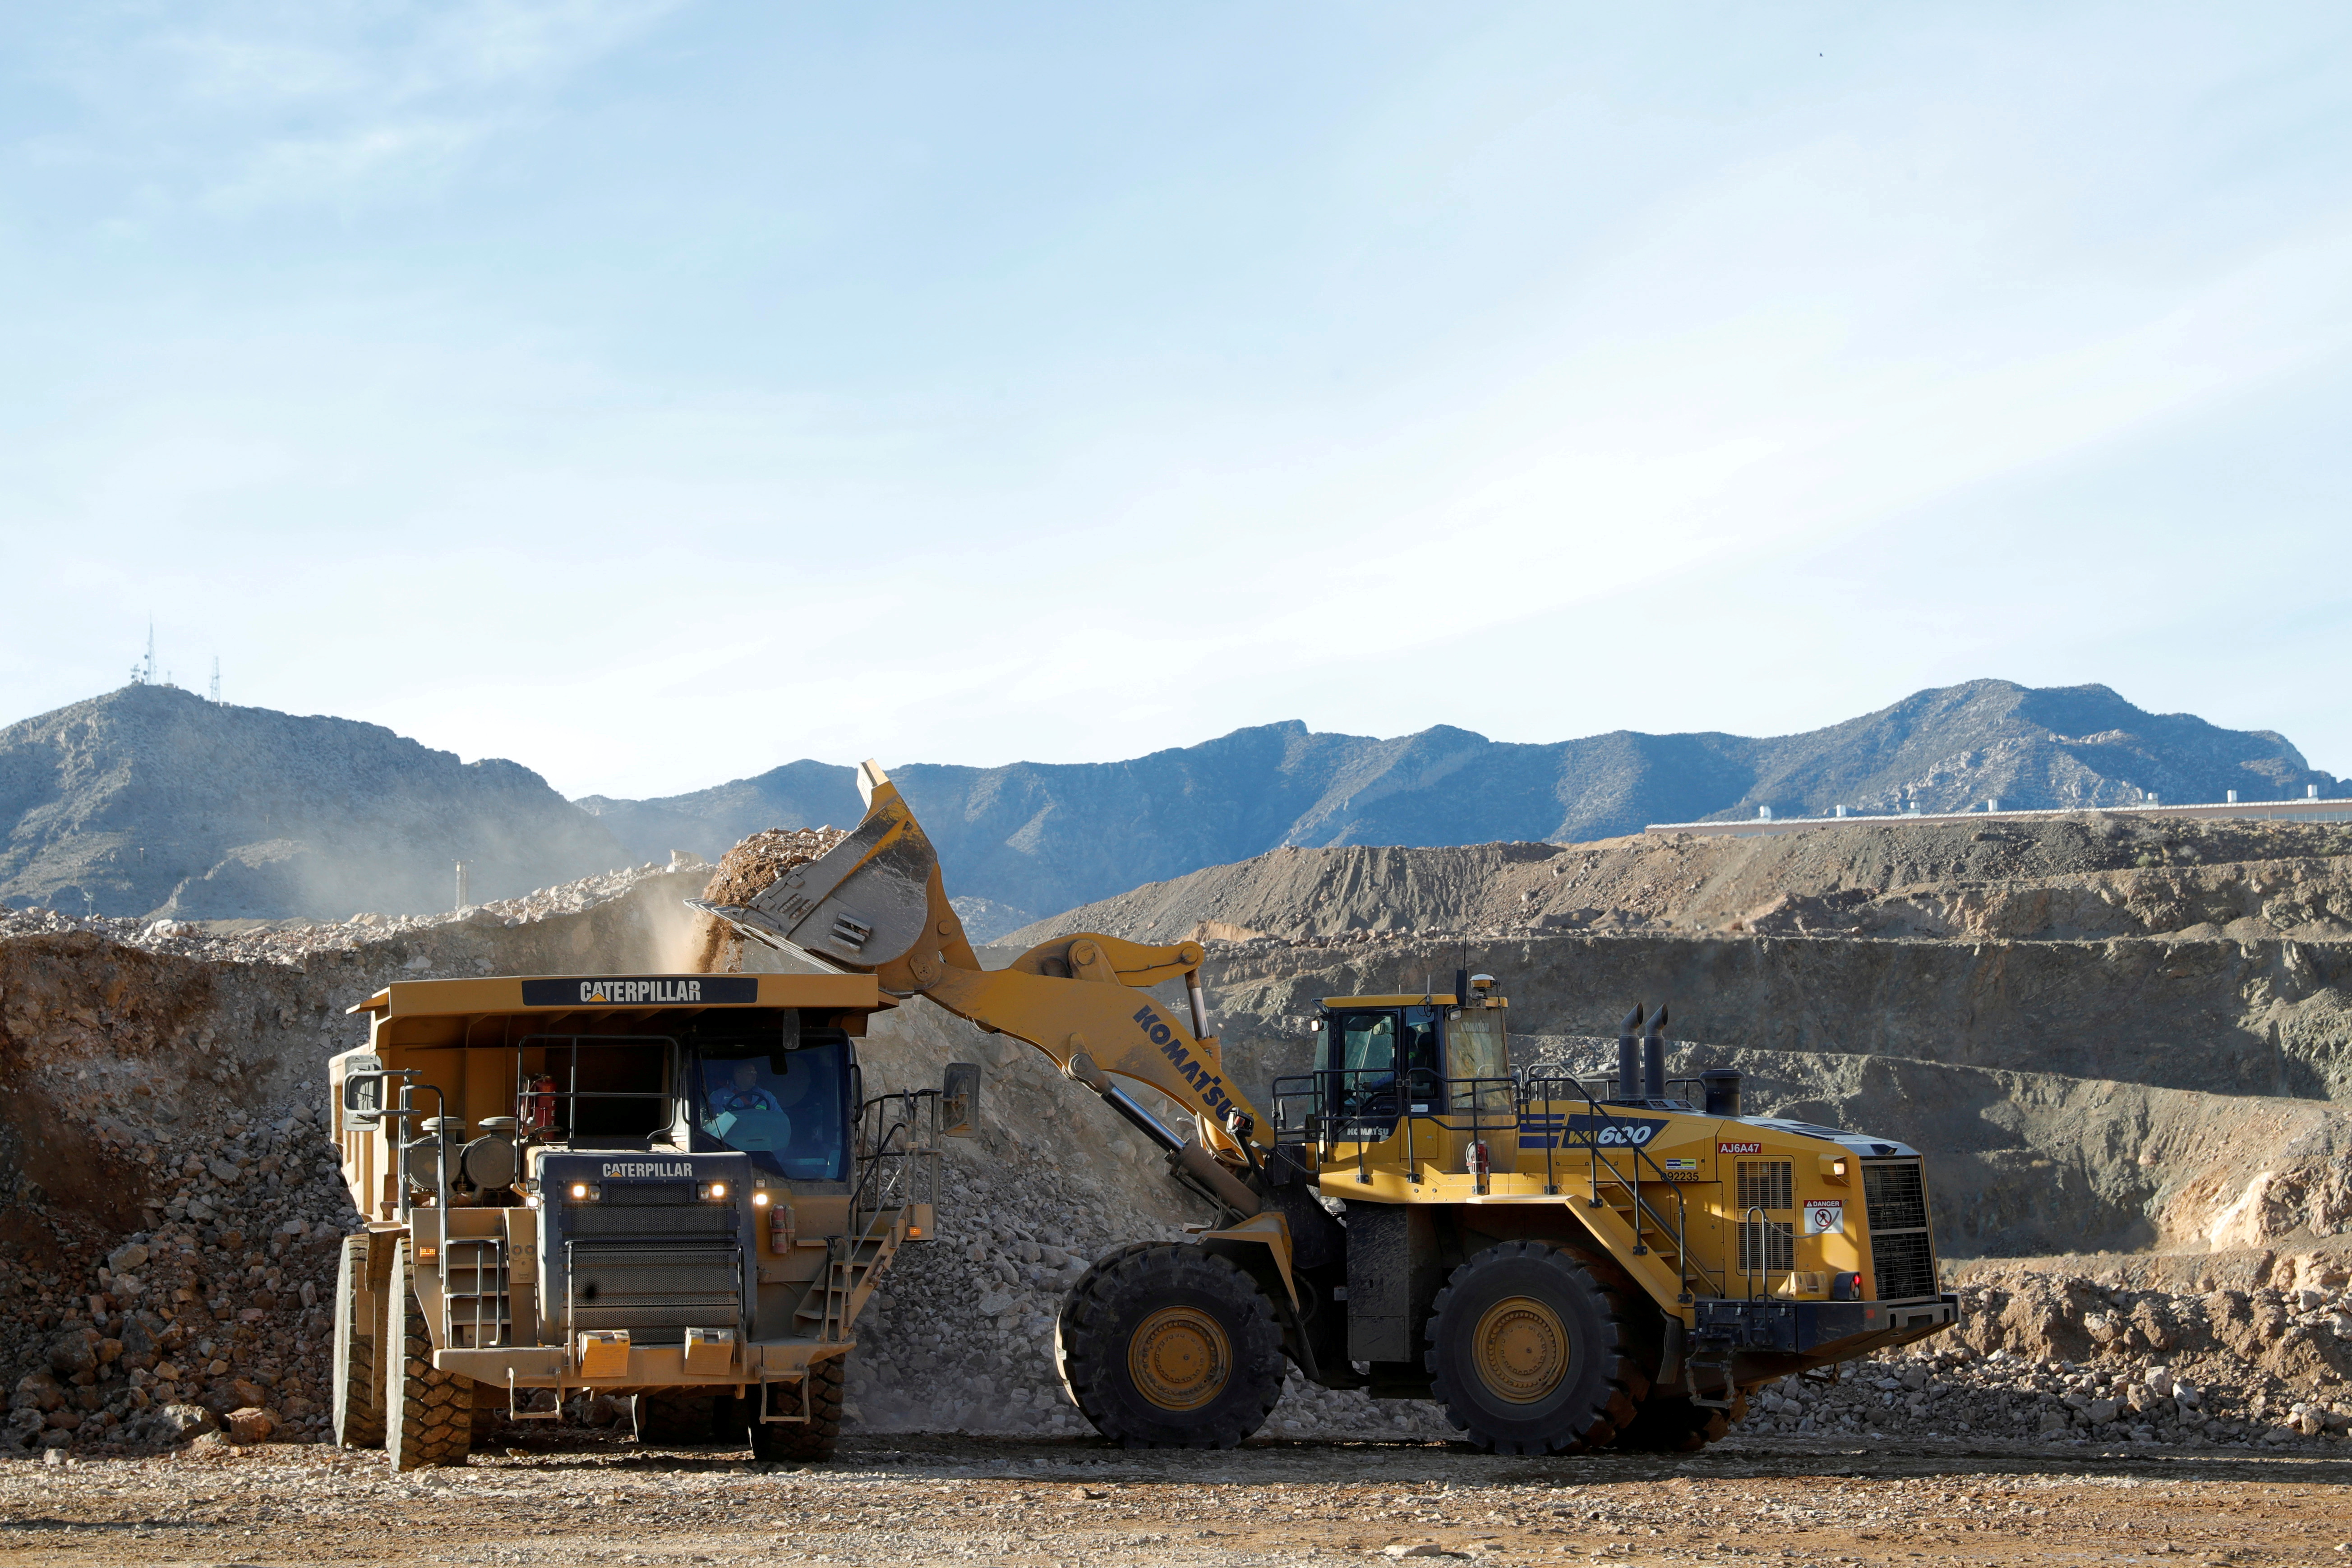 A wheel loader operator fills a truck with ore at the MP Materials rare earth mine in Mountain Pass